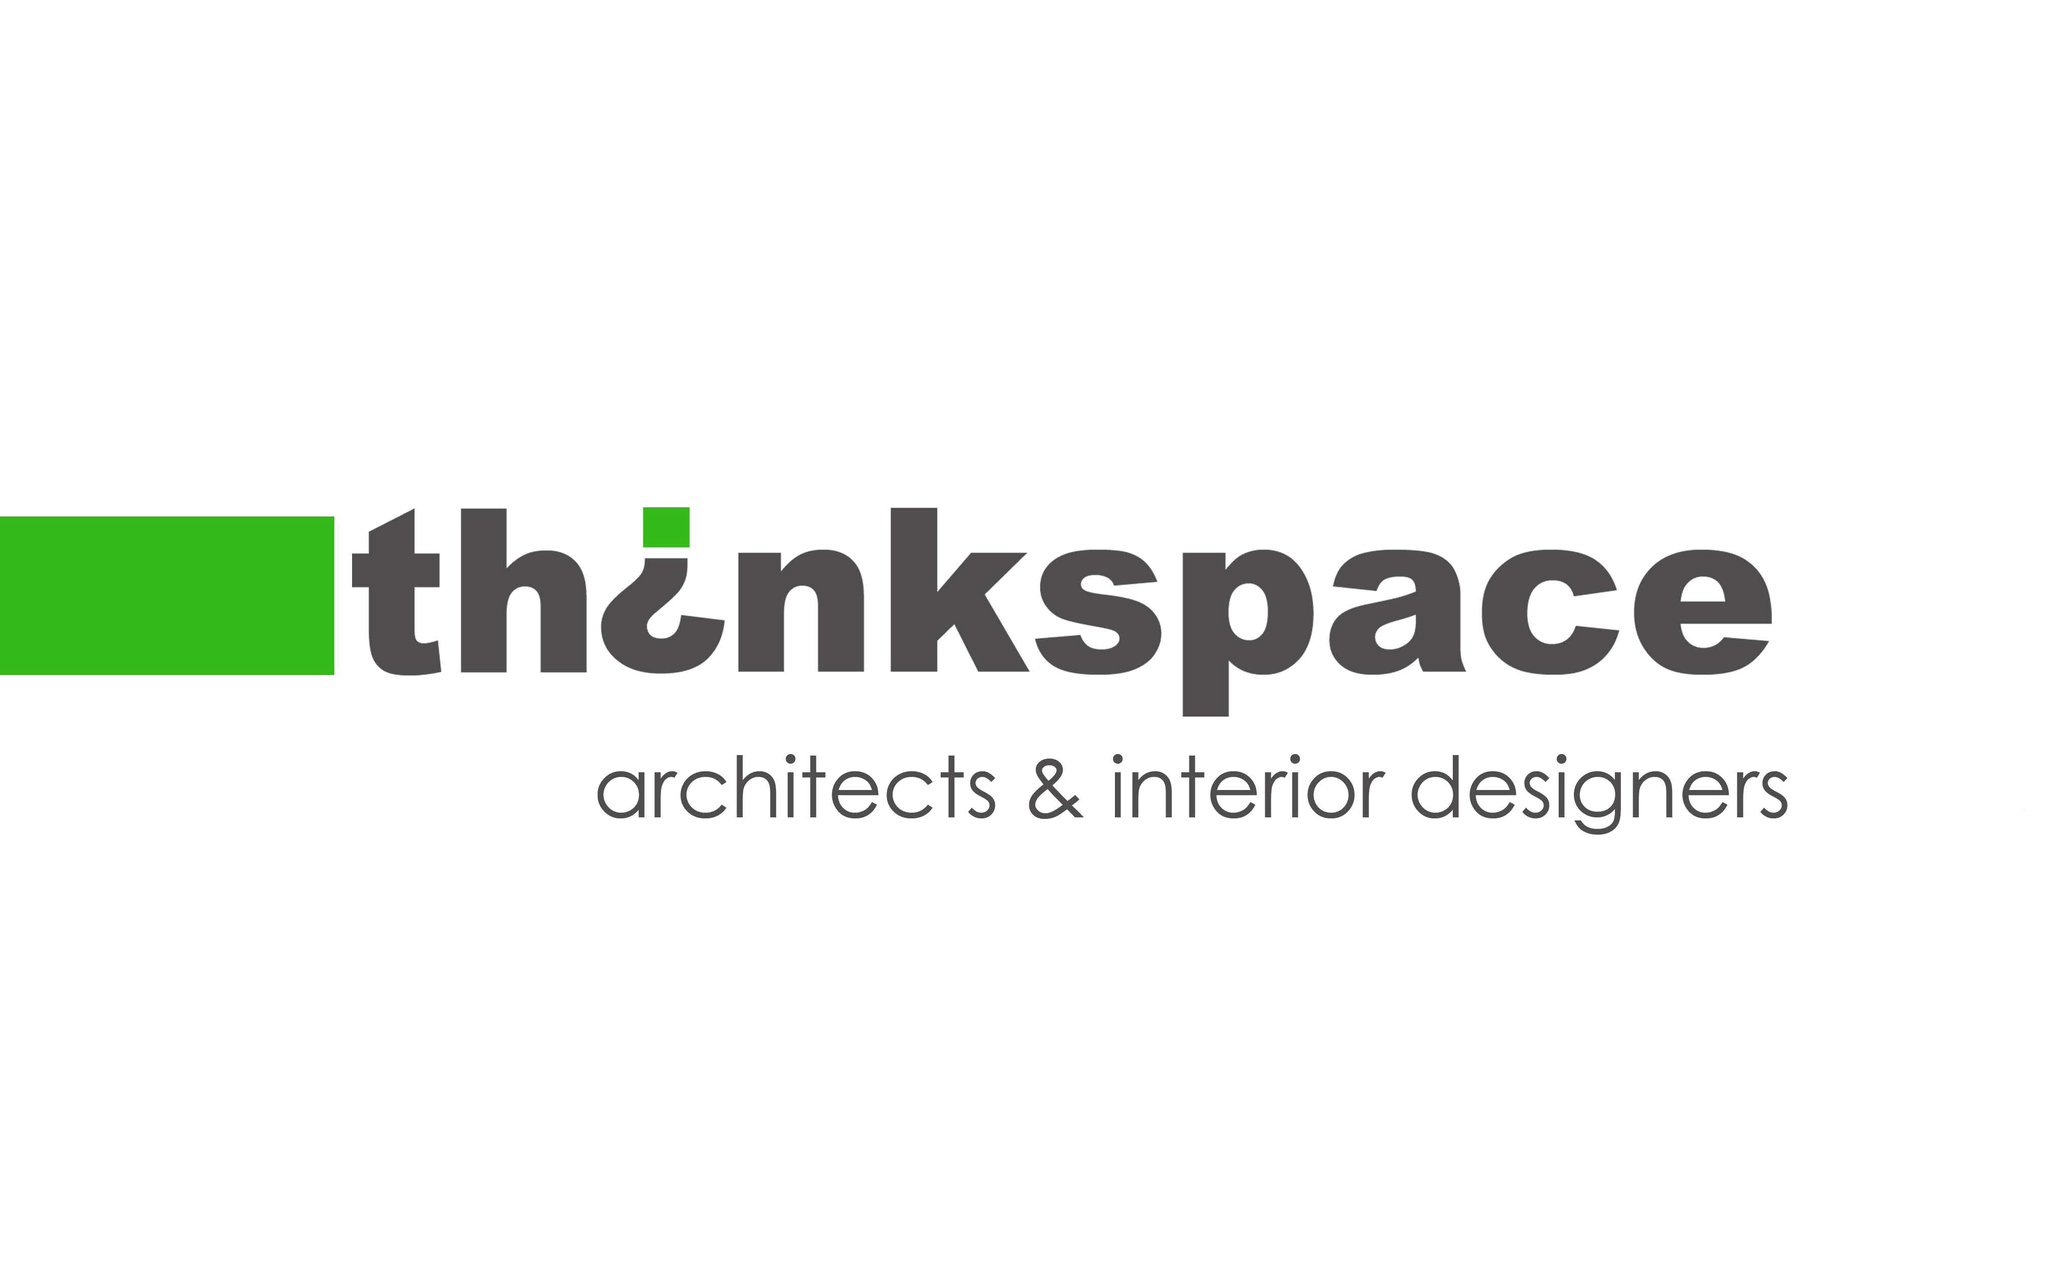 thinkspace architects|Legal Services|Professional Services